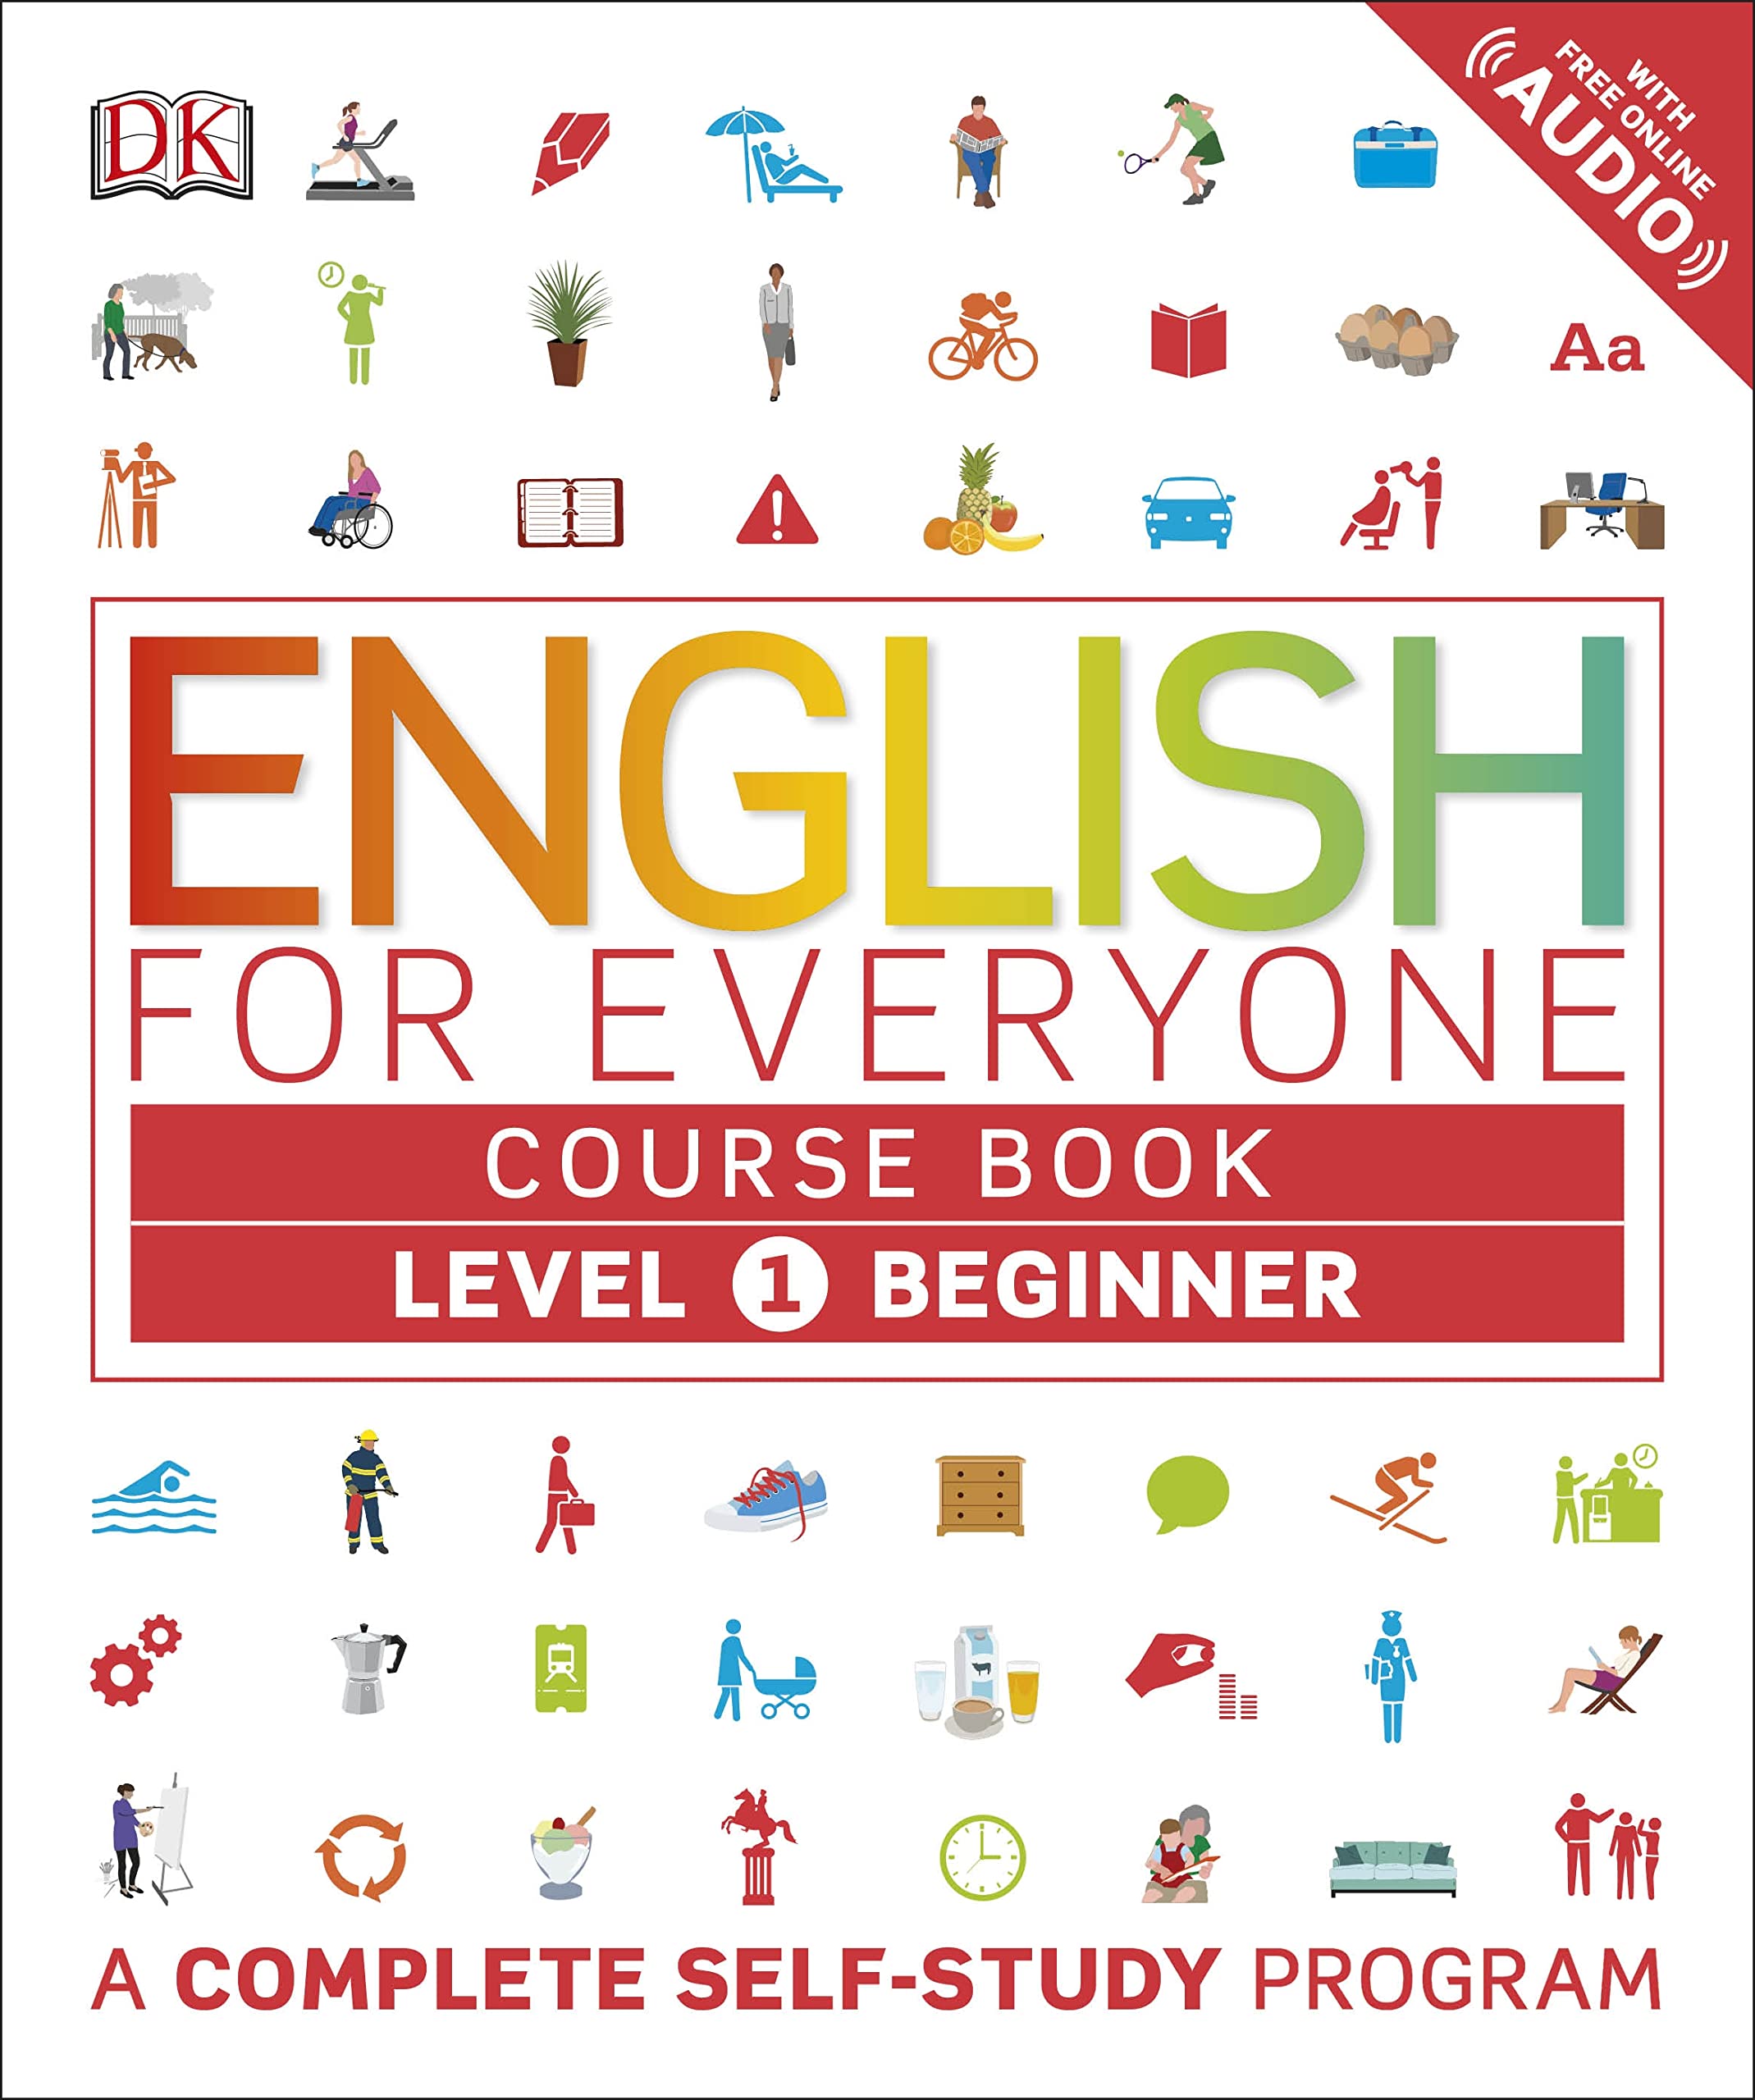 English for Everyone: Level 1 Course Book - Beginner English - CA Corrections Bookstore